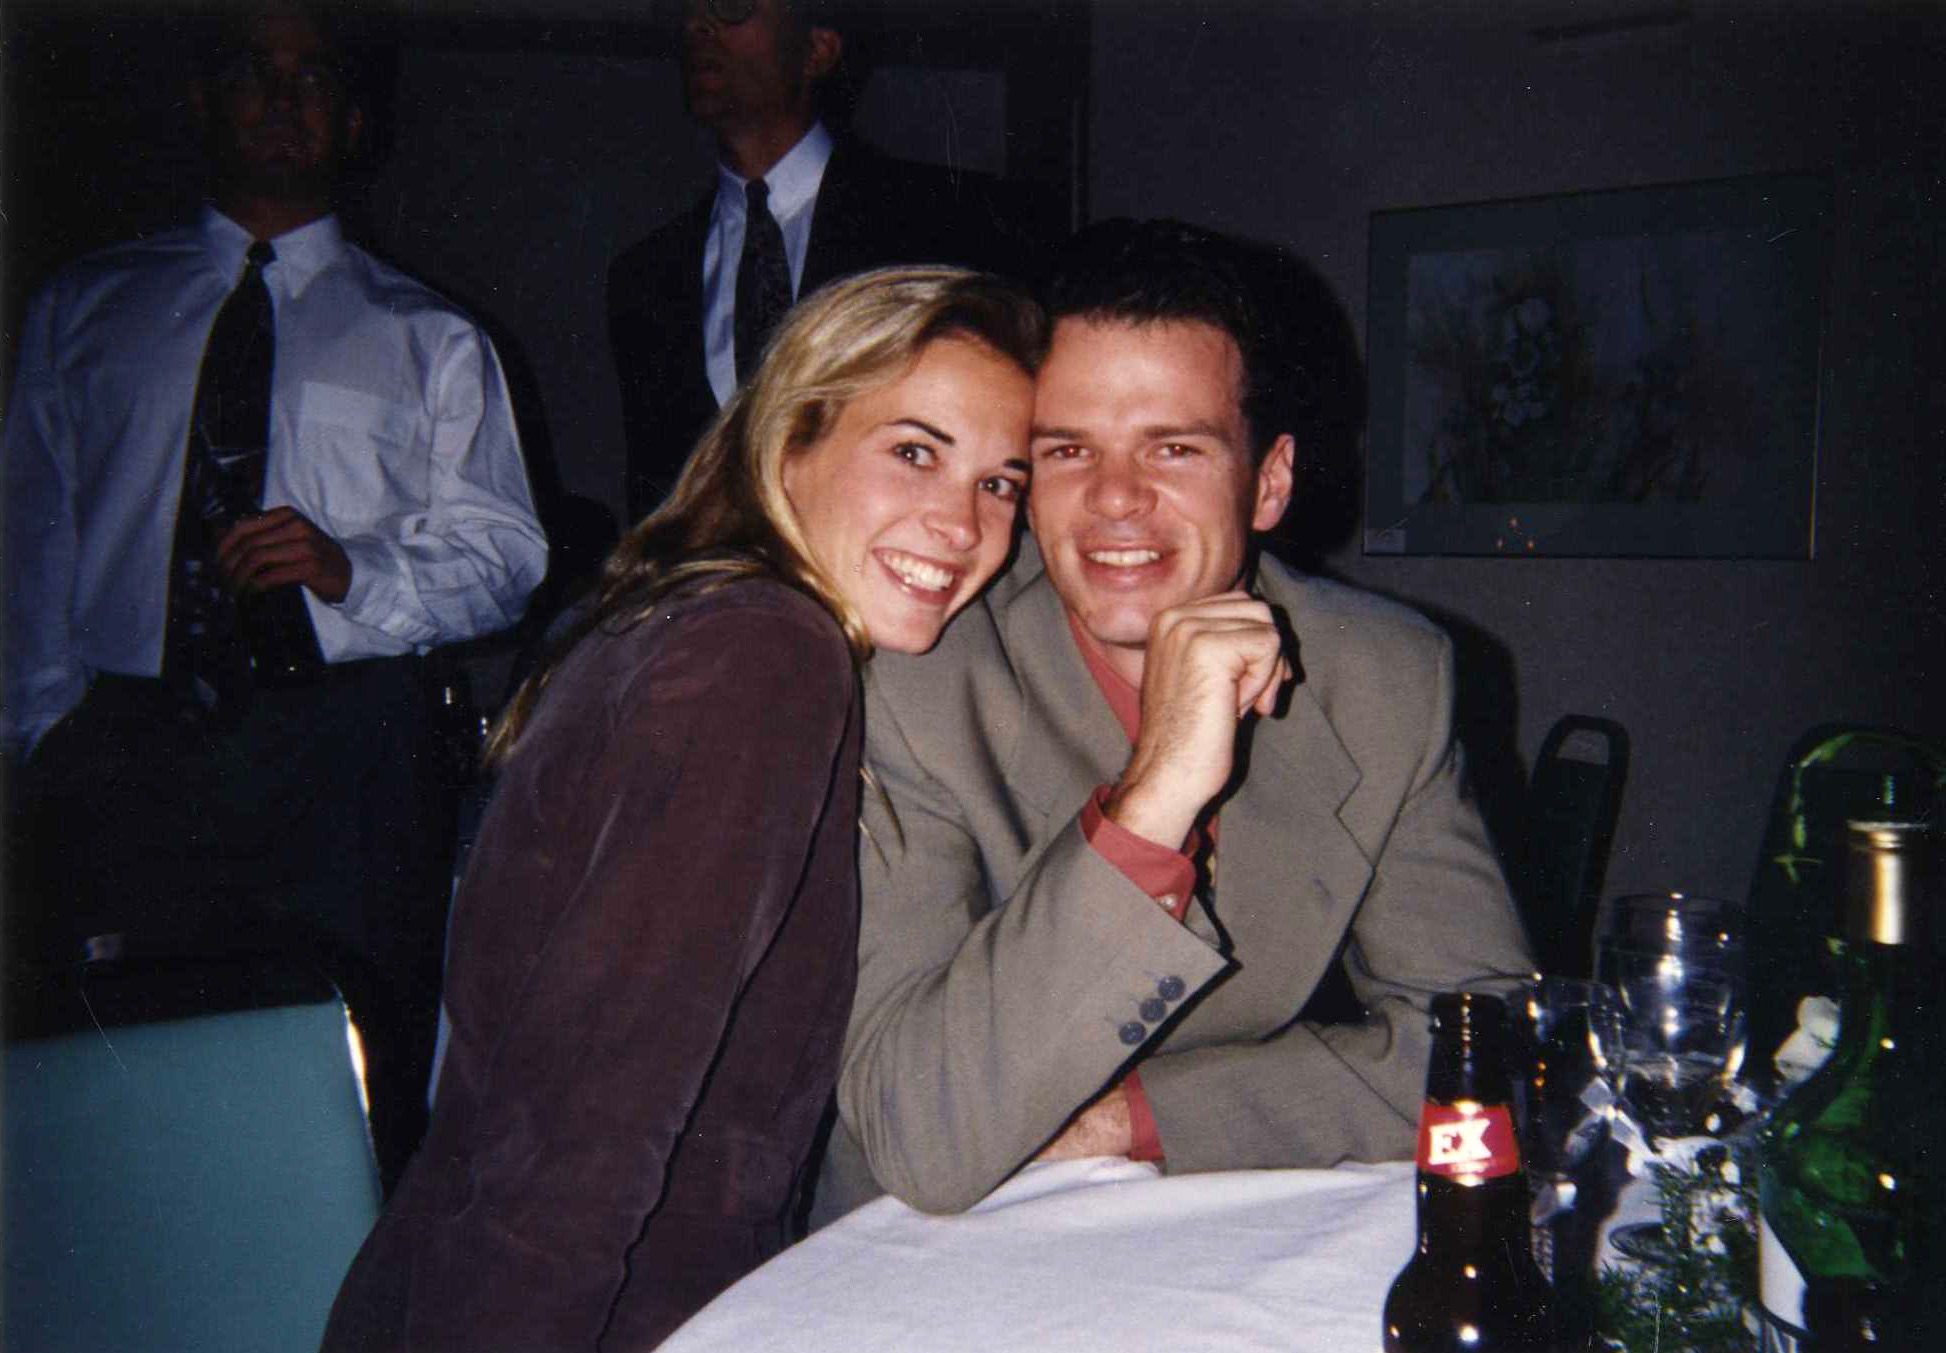 PHOTO: Suzy Favor Hamilton and her husband Mark Hamilton are pictured together in happier times.